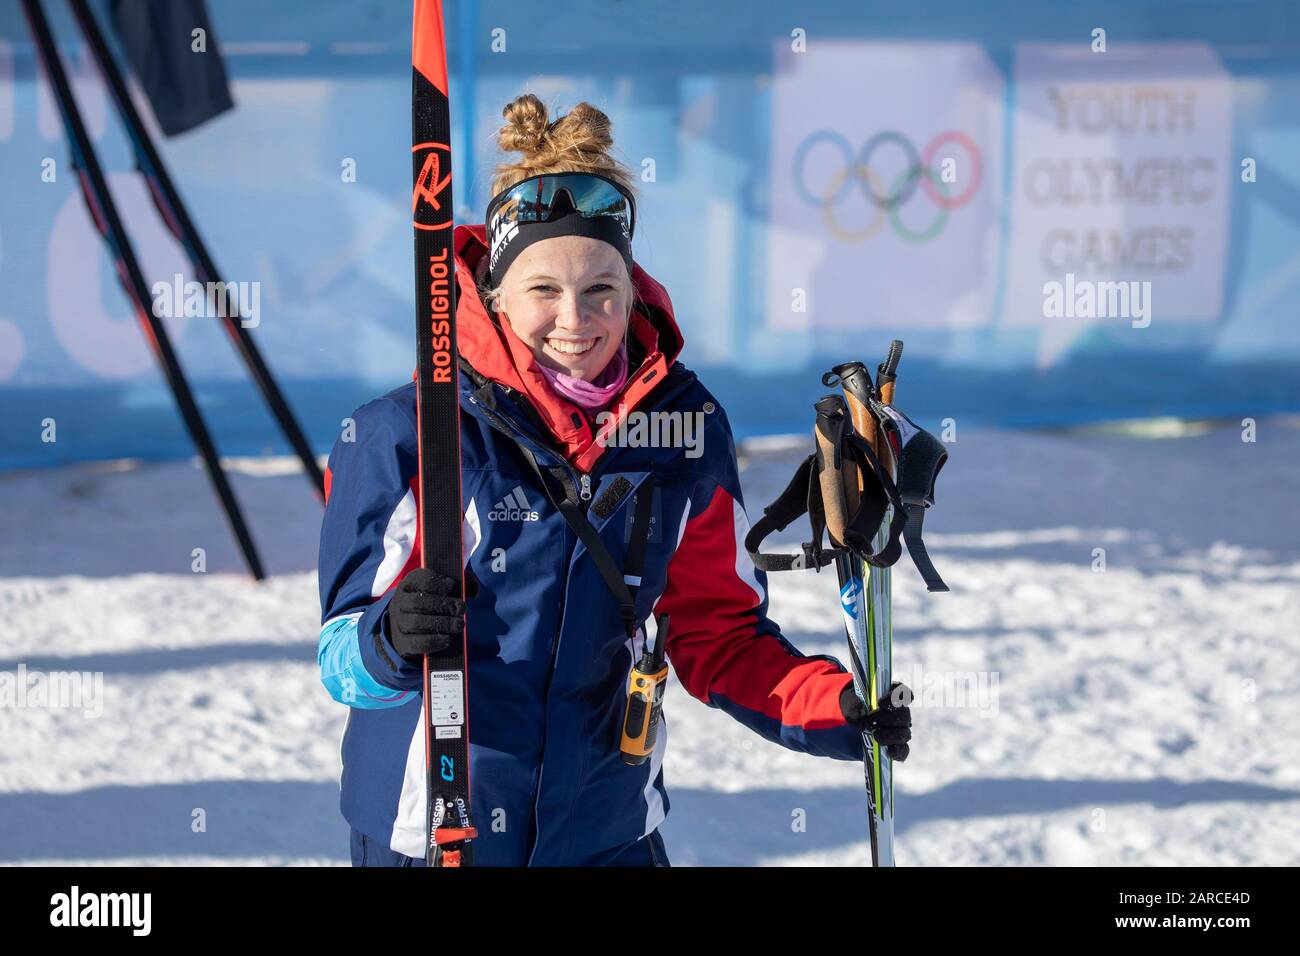 Team GB's nordic combined Mani Cooper the Lausanne 2020 Youth Olympic Games on the 21st January 2020 at the Vallée de Joux Cross-Country Centre. Stock Photo